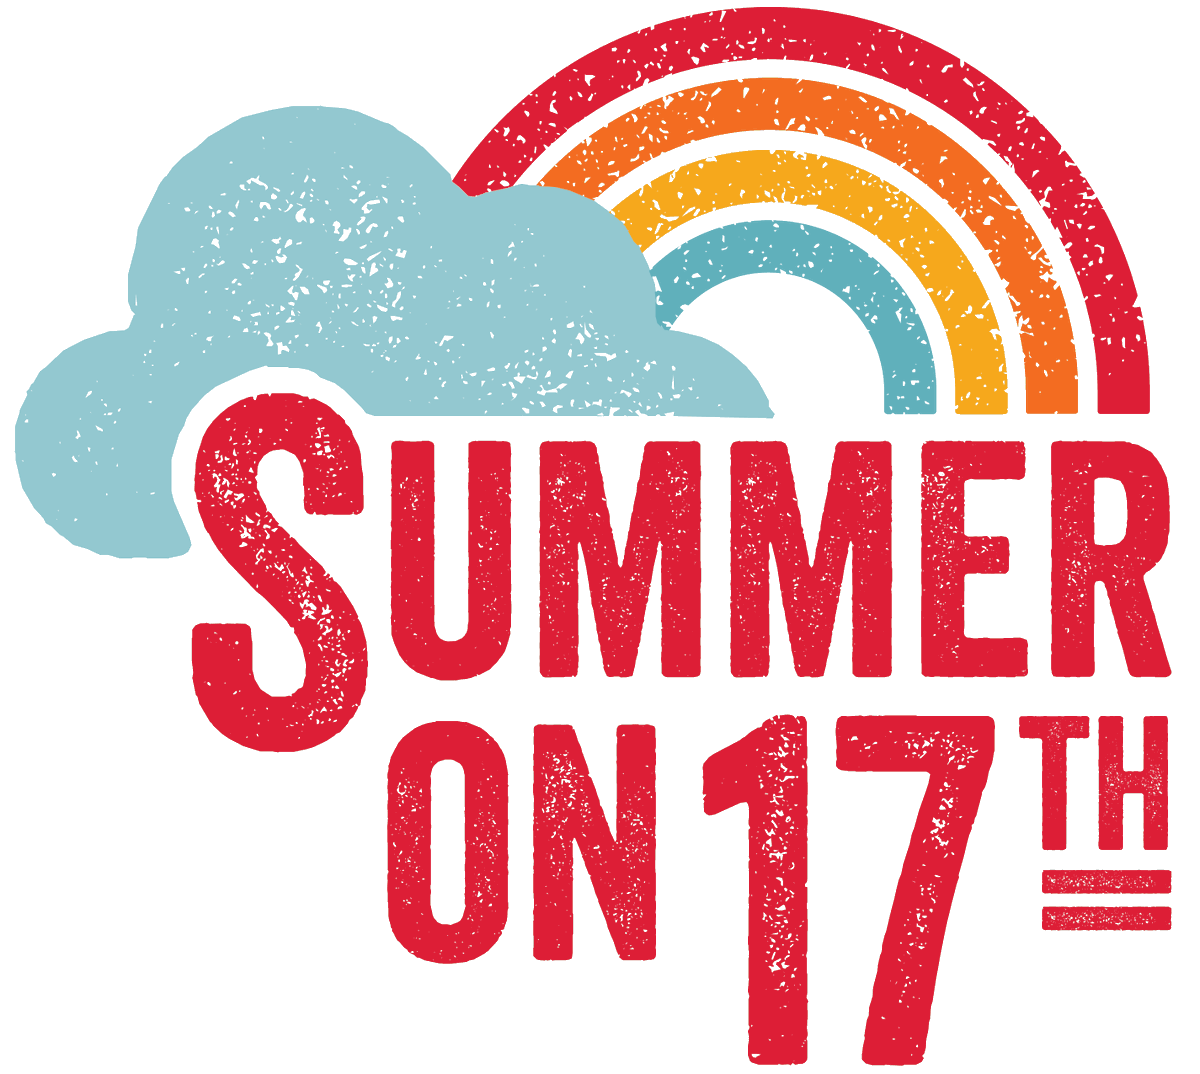 Summer On 17th is back along with all of your favourite events! From movies in the park to live bands, theatrical performances and fitness classes, @17thavesw is pulling out all the stops to ensure this summer is epic. Ongoing | Schedule at cada.at/3P2BLOP. #yycArts